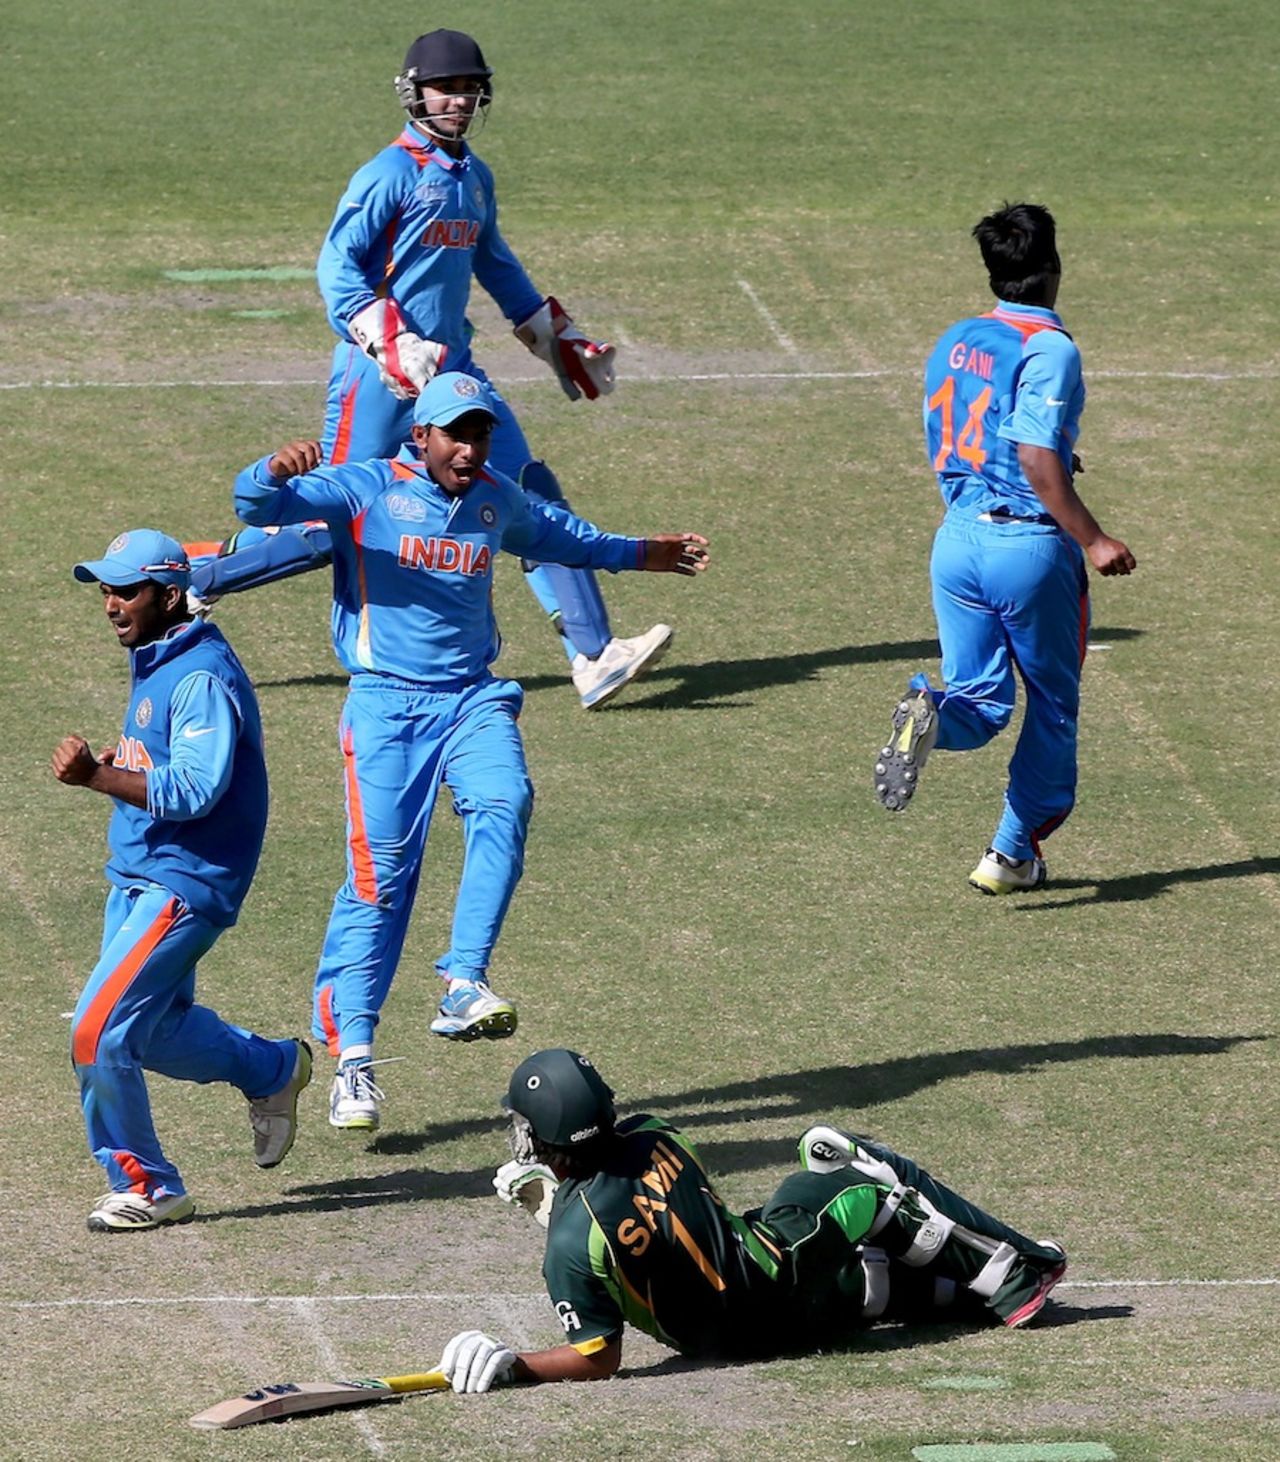 India players celebrate after running-out Sami Aslam, India v Pakistan, Under-19 World Cup, Group A, Dubai, February 15, 2014